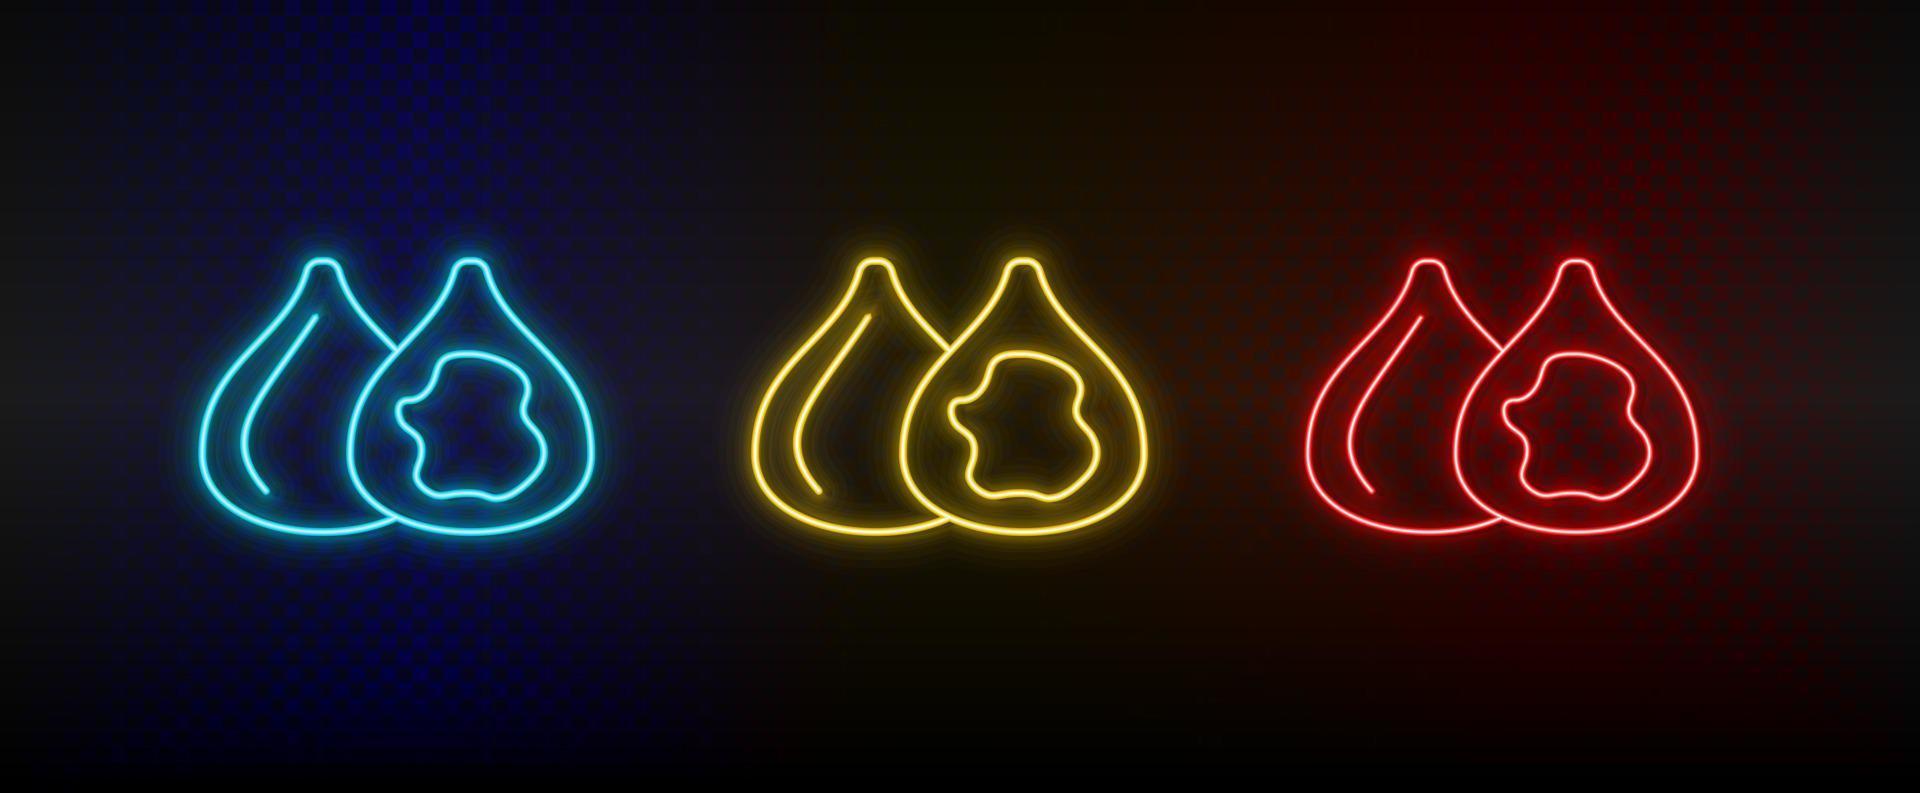 Neon icon set figs, food, fruit. Set of red, blue, yellow neon vector icon on dark background